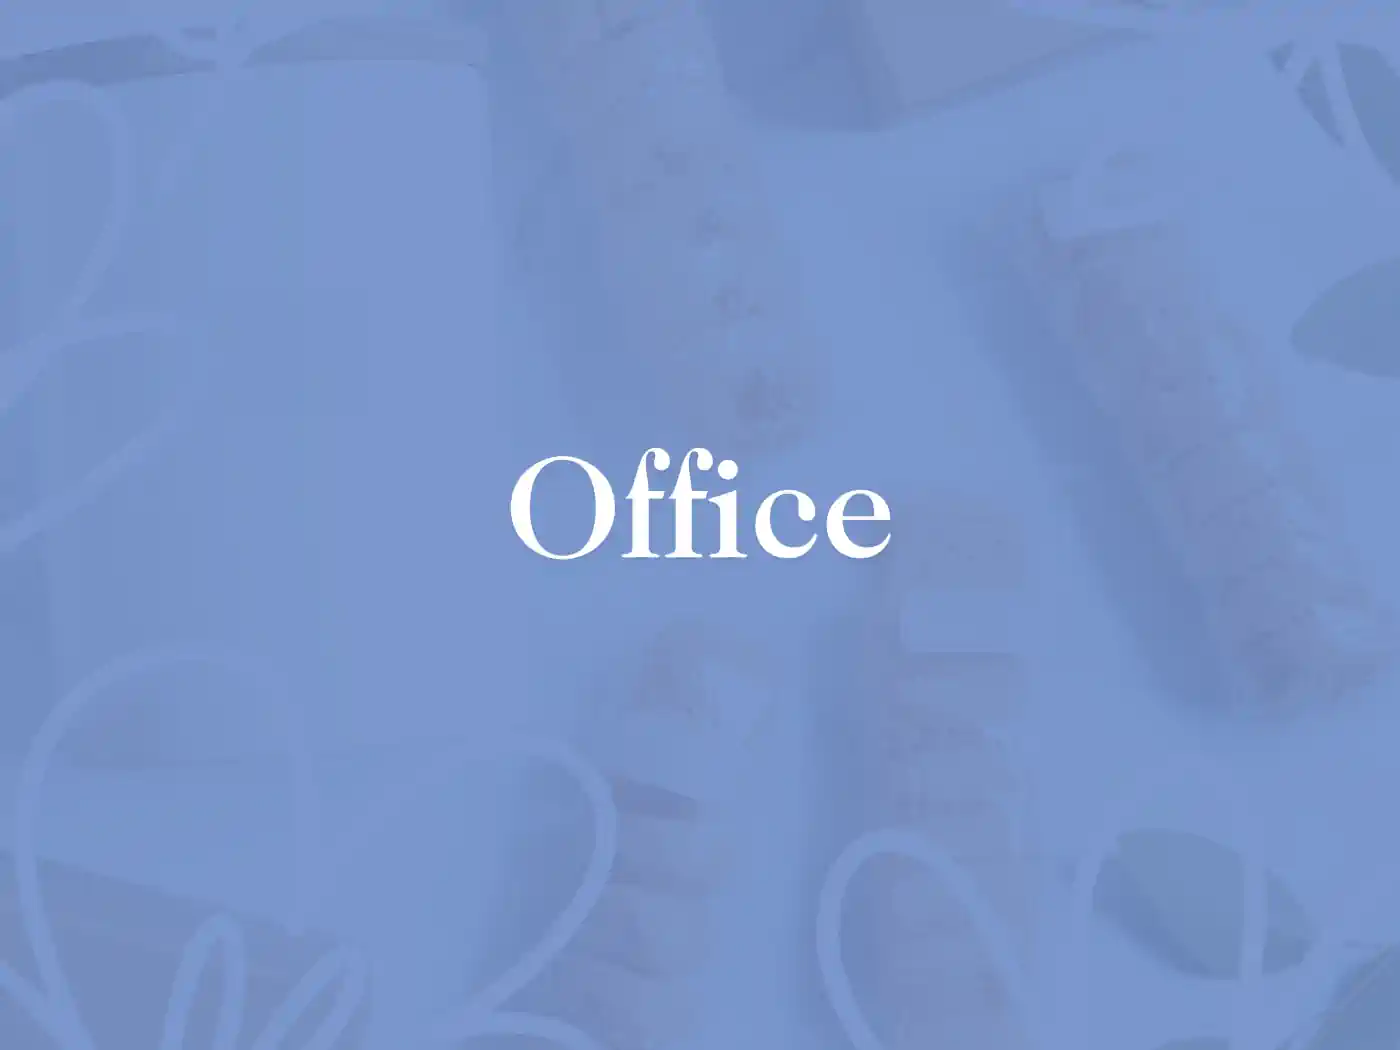 "Office" text over a blurred background featuring floral arrangements and office supplies. Fabulous Flowers and Gifts, Office Collection.